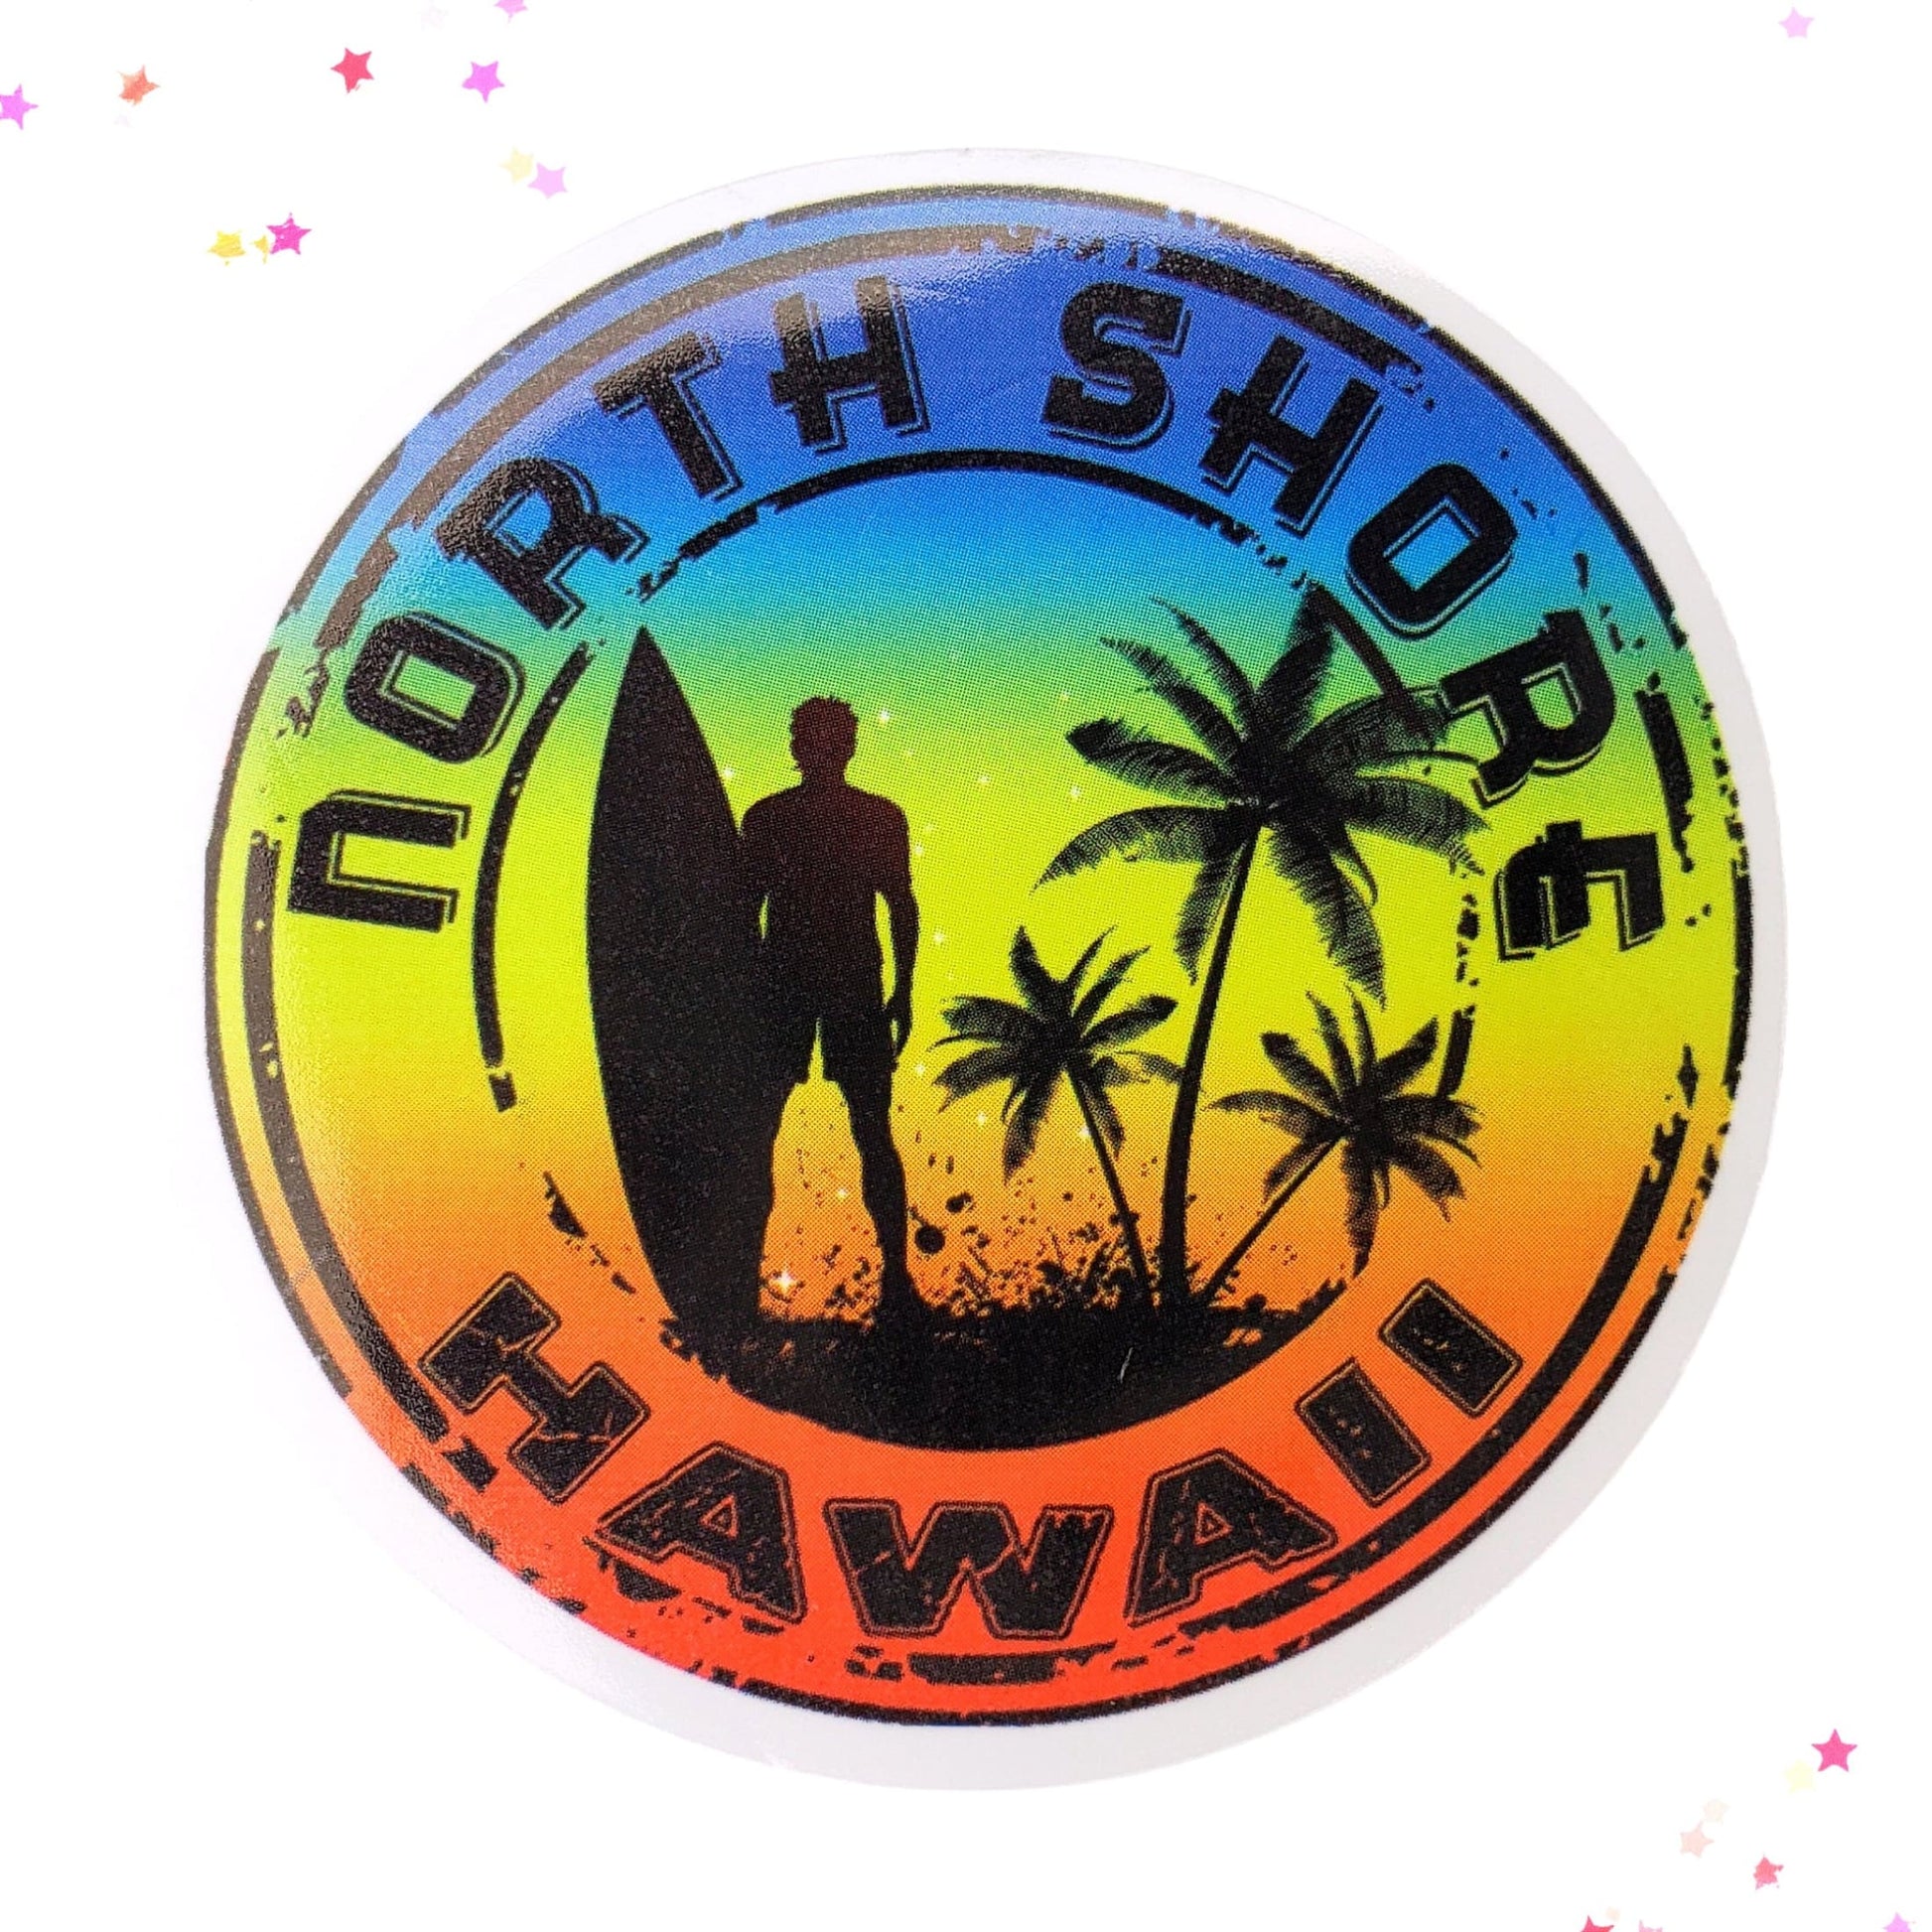 North Shore Hawaii Waterproof Sticker from Confetti Kitty, Only 1.00